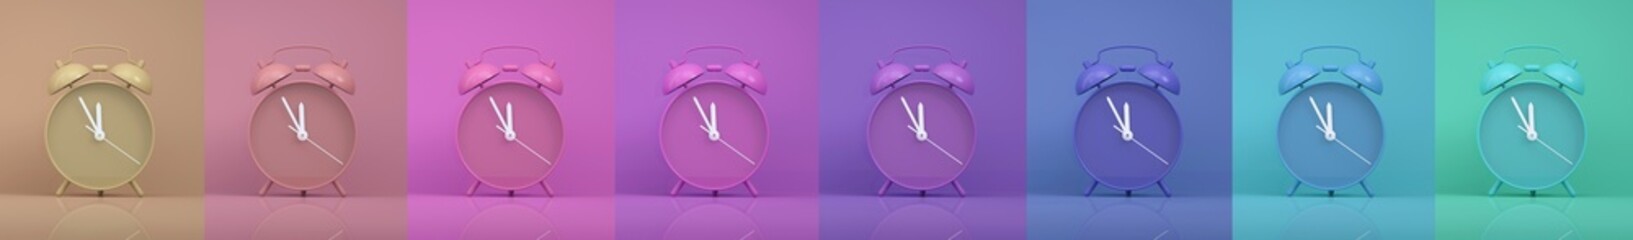 collage of vintage colored alarm clock on color background - hurry up, last chance concept with copy space